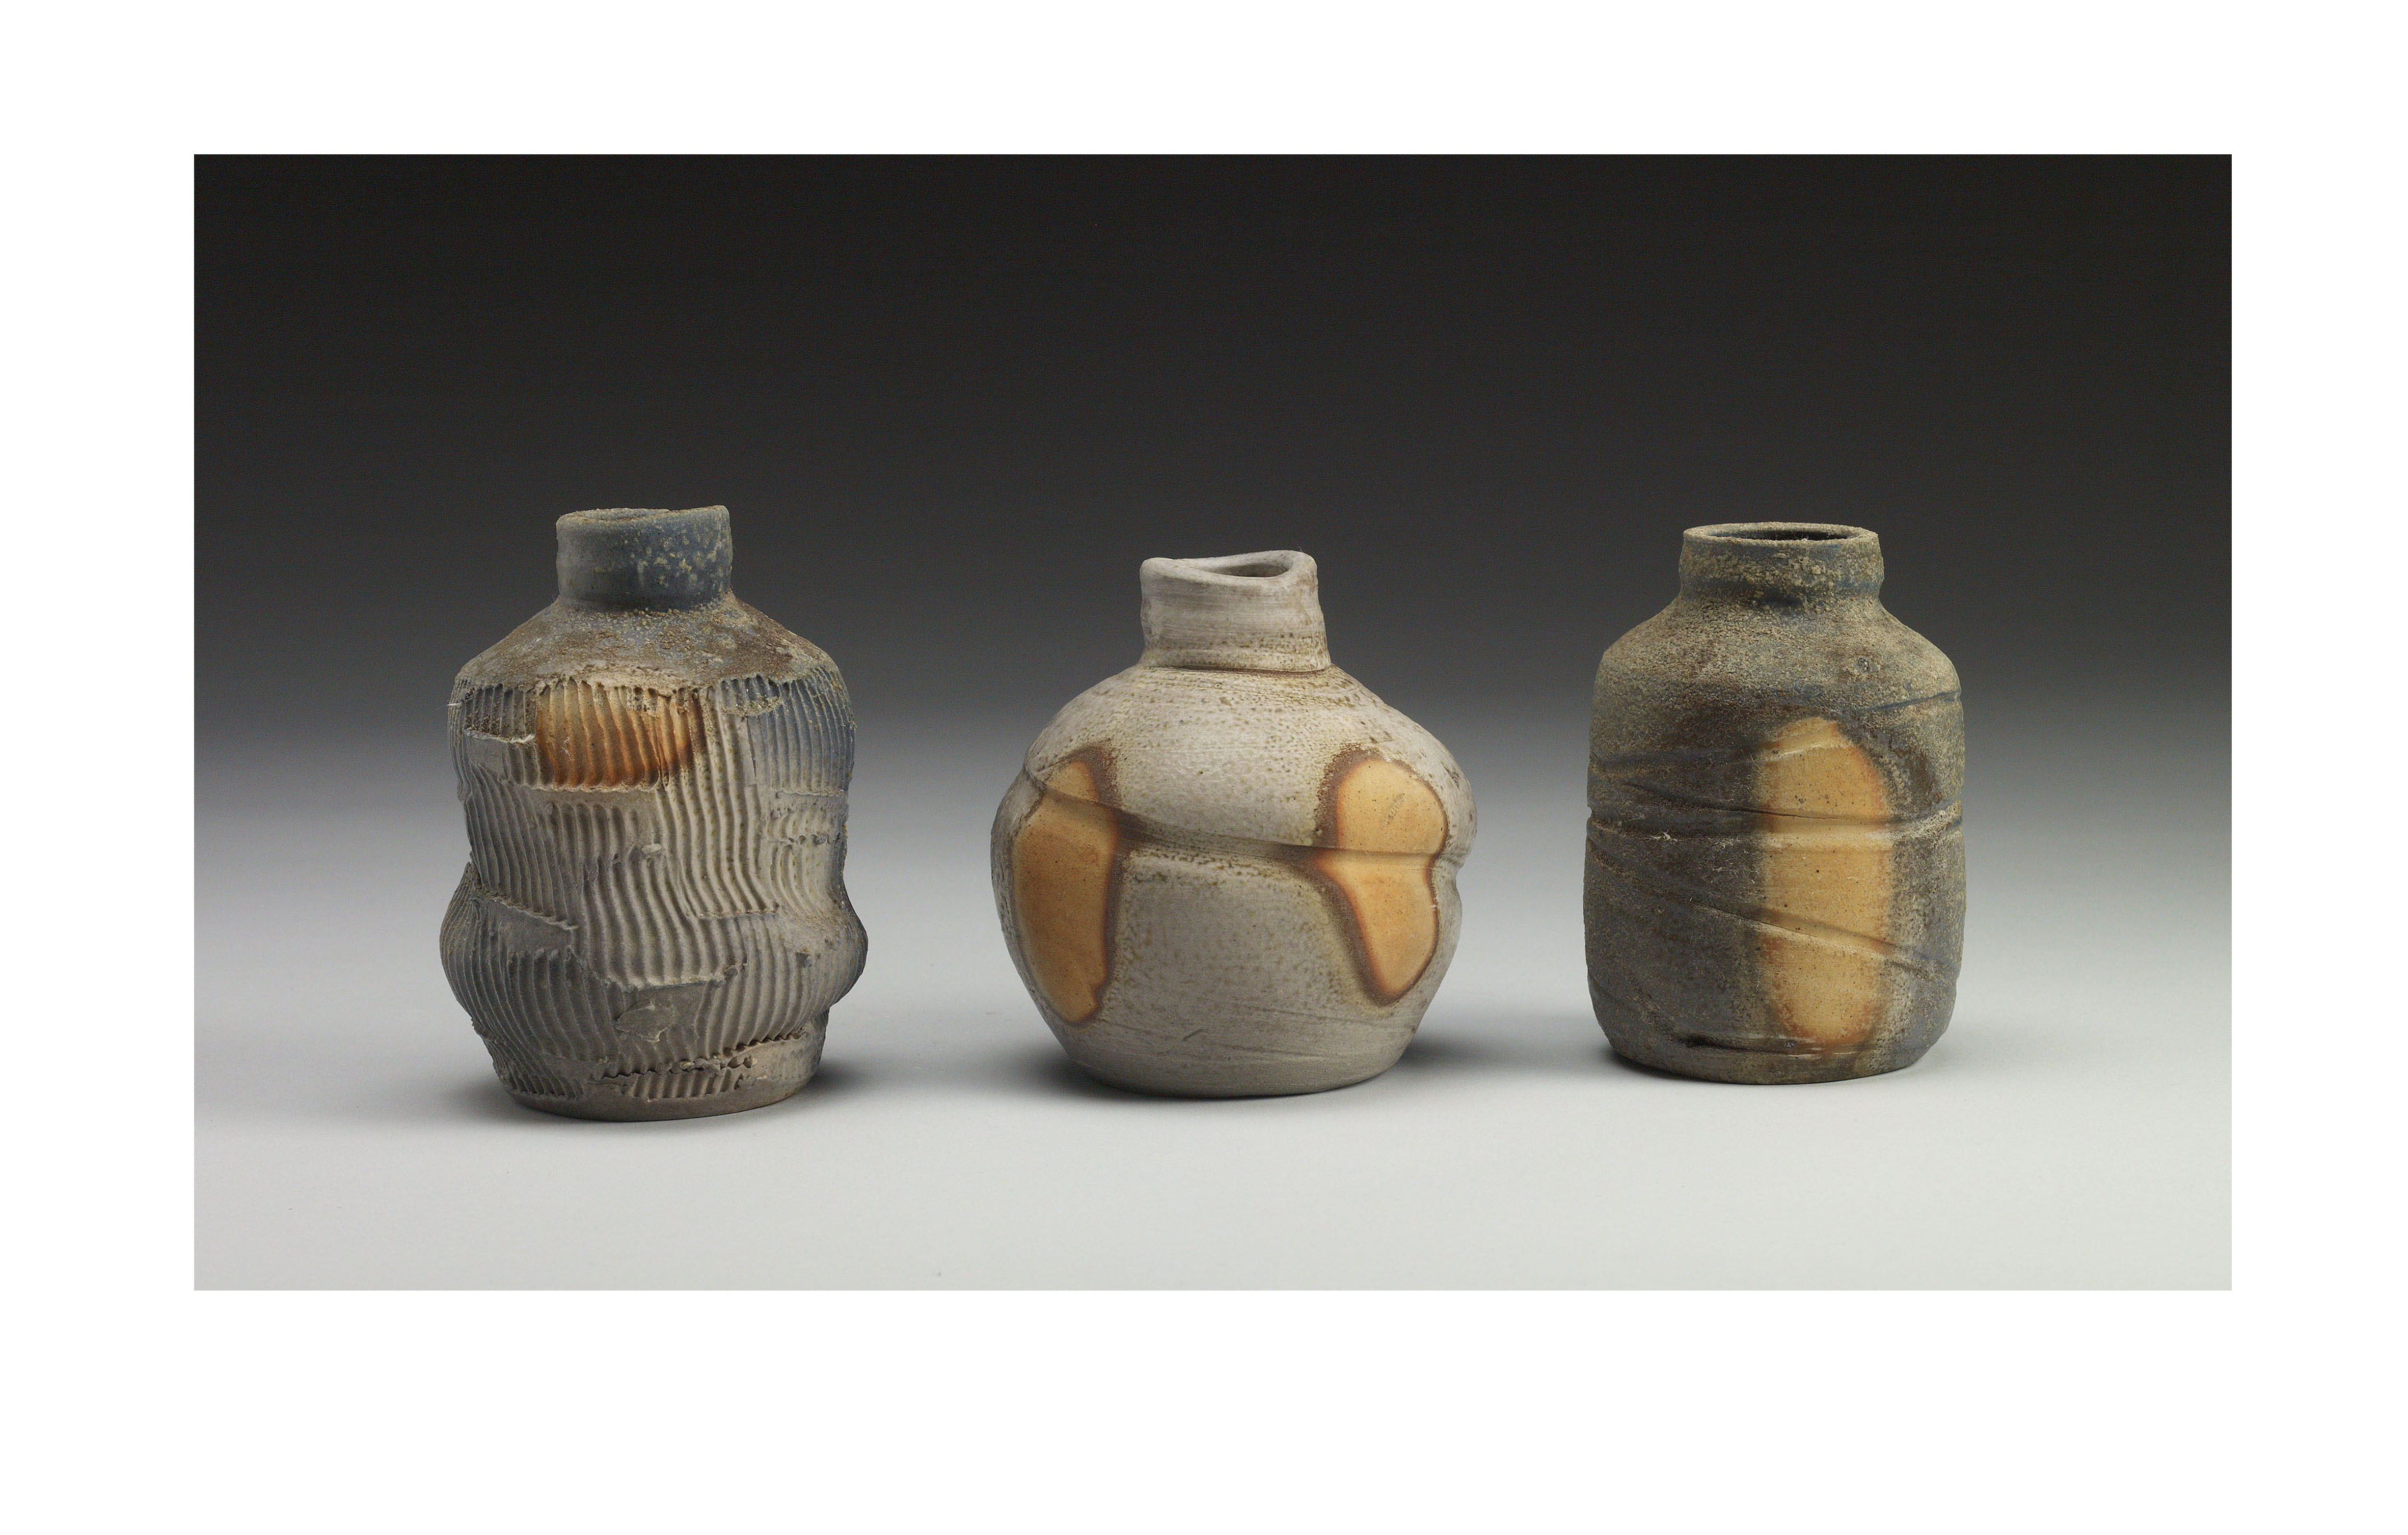 Meg Beaudoin, Mini Bottle Set, to 4.25 in. (11 cm) in height, stoneware, wadding, natural-ash glaze, fired for 7 days to cone 10 in an anagama wood kiln, 2018. www.megbeaudoinceramics.com